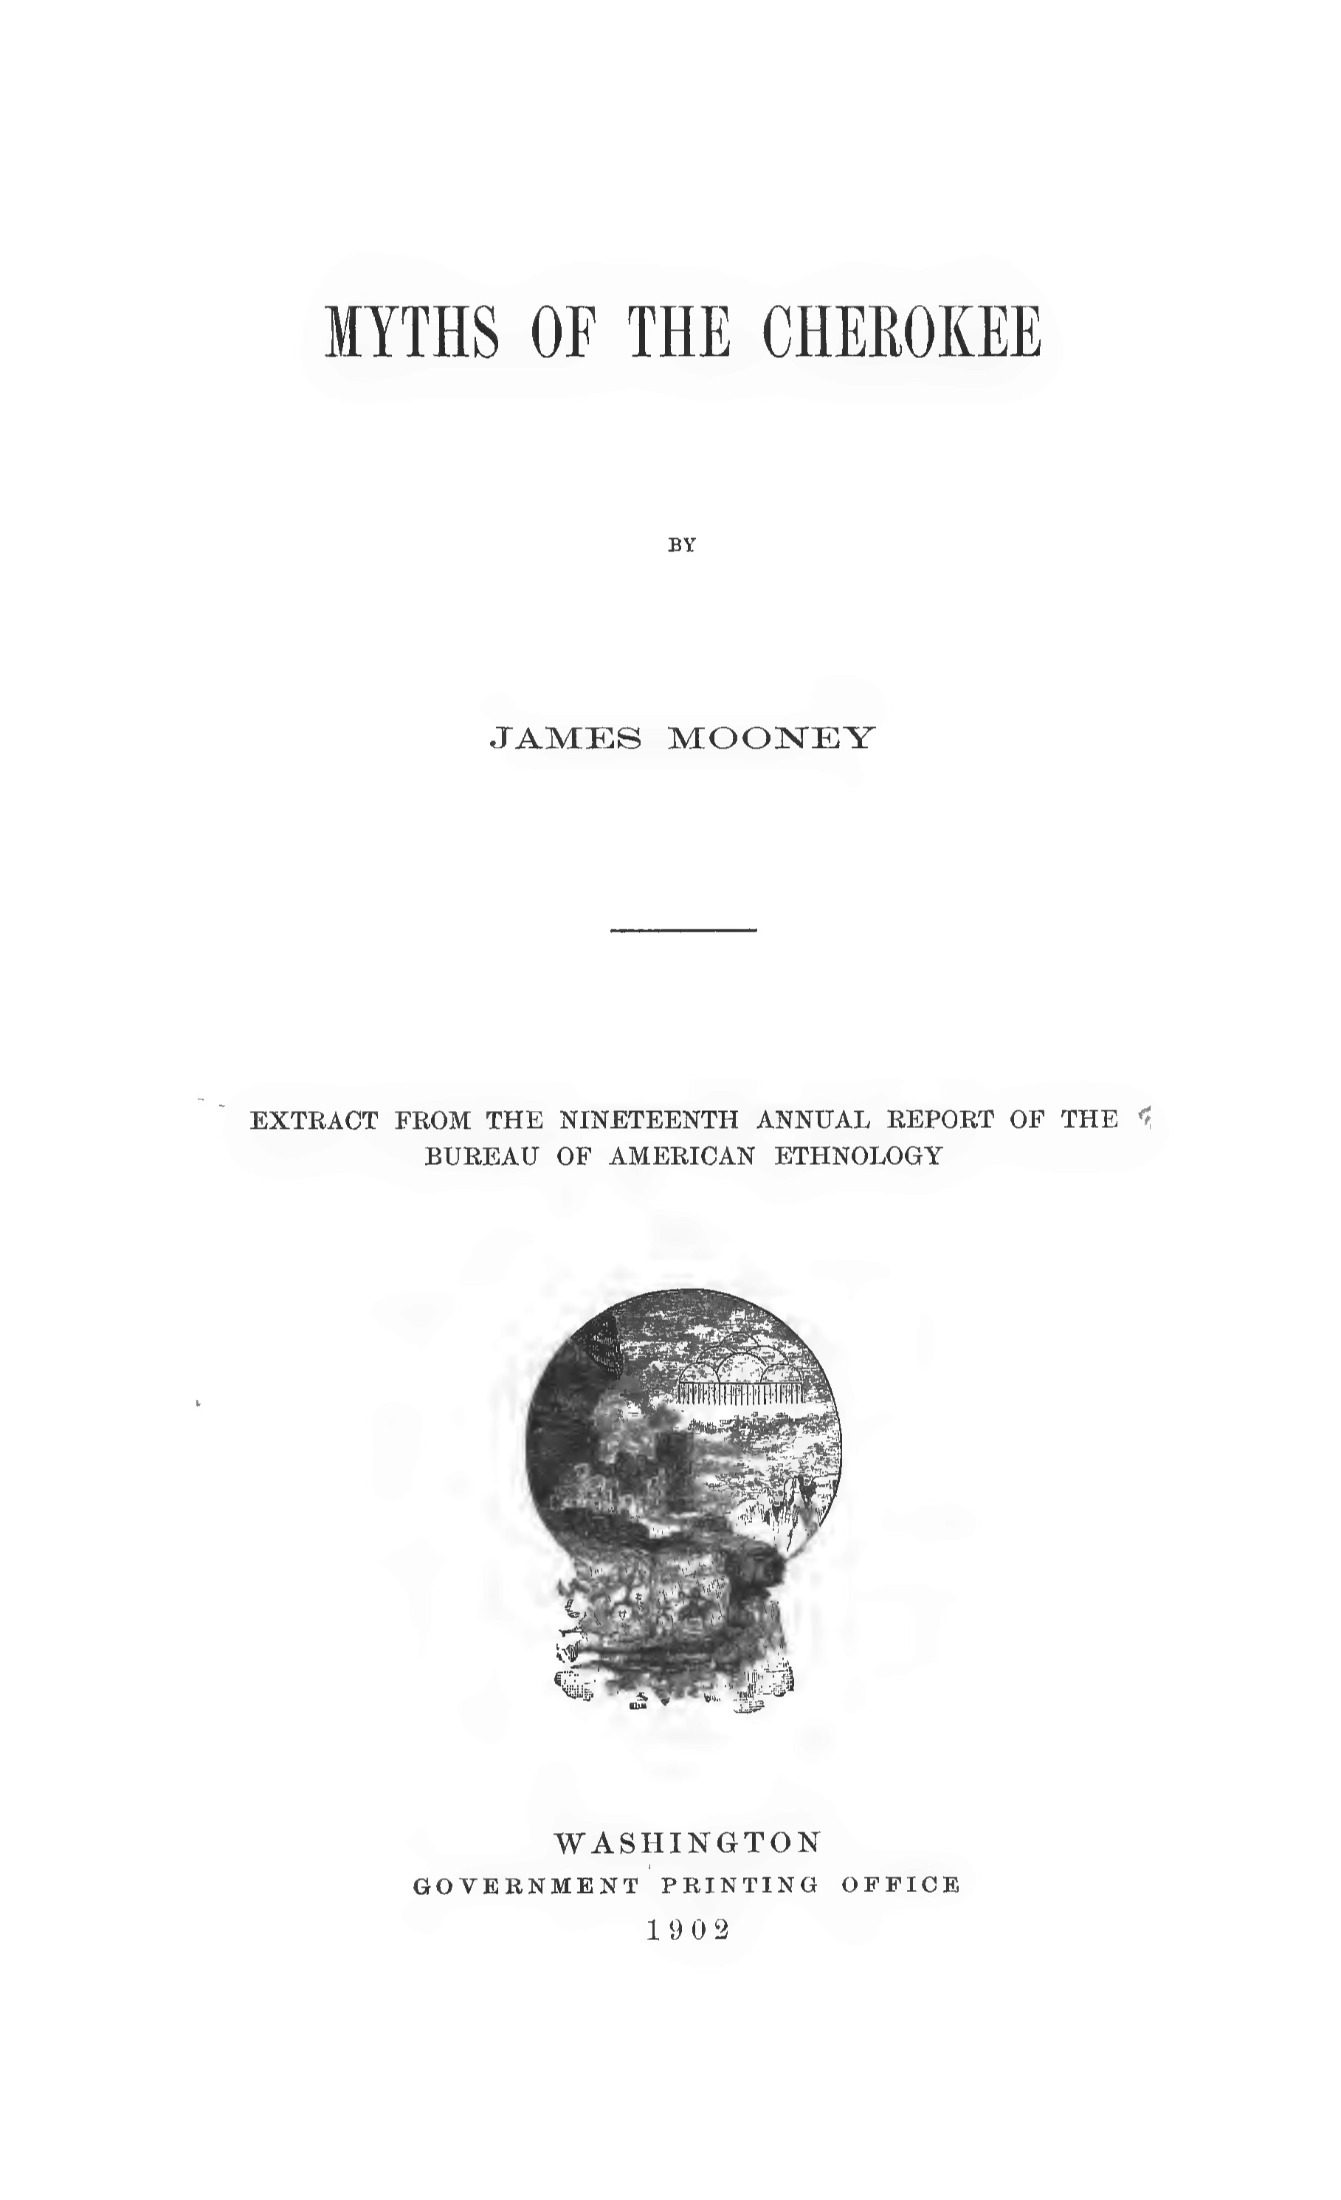 Text cover art